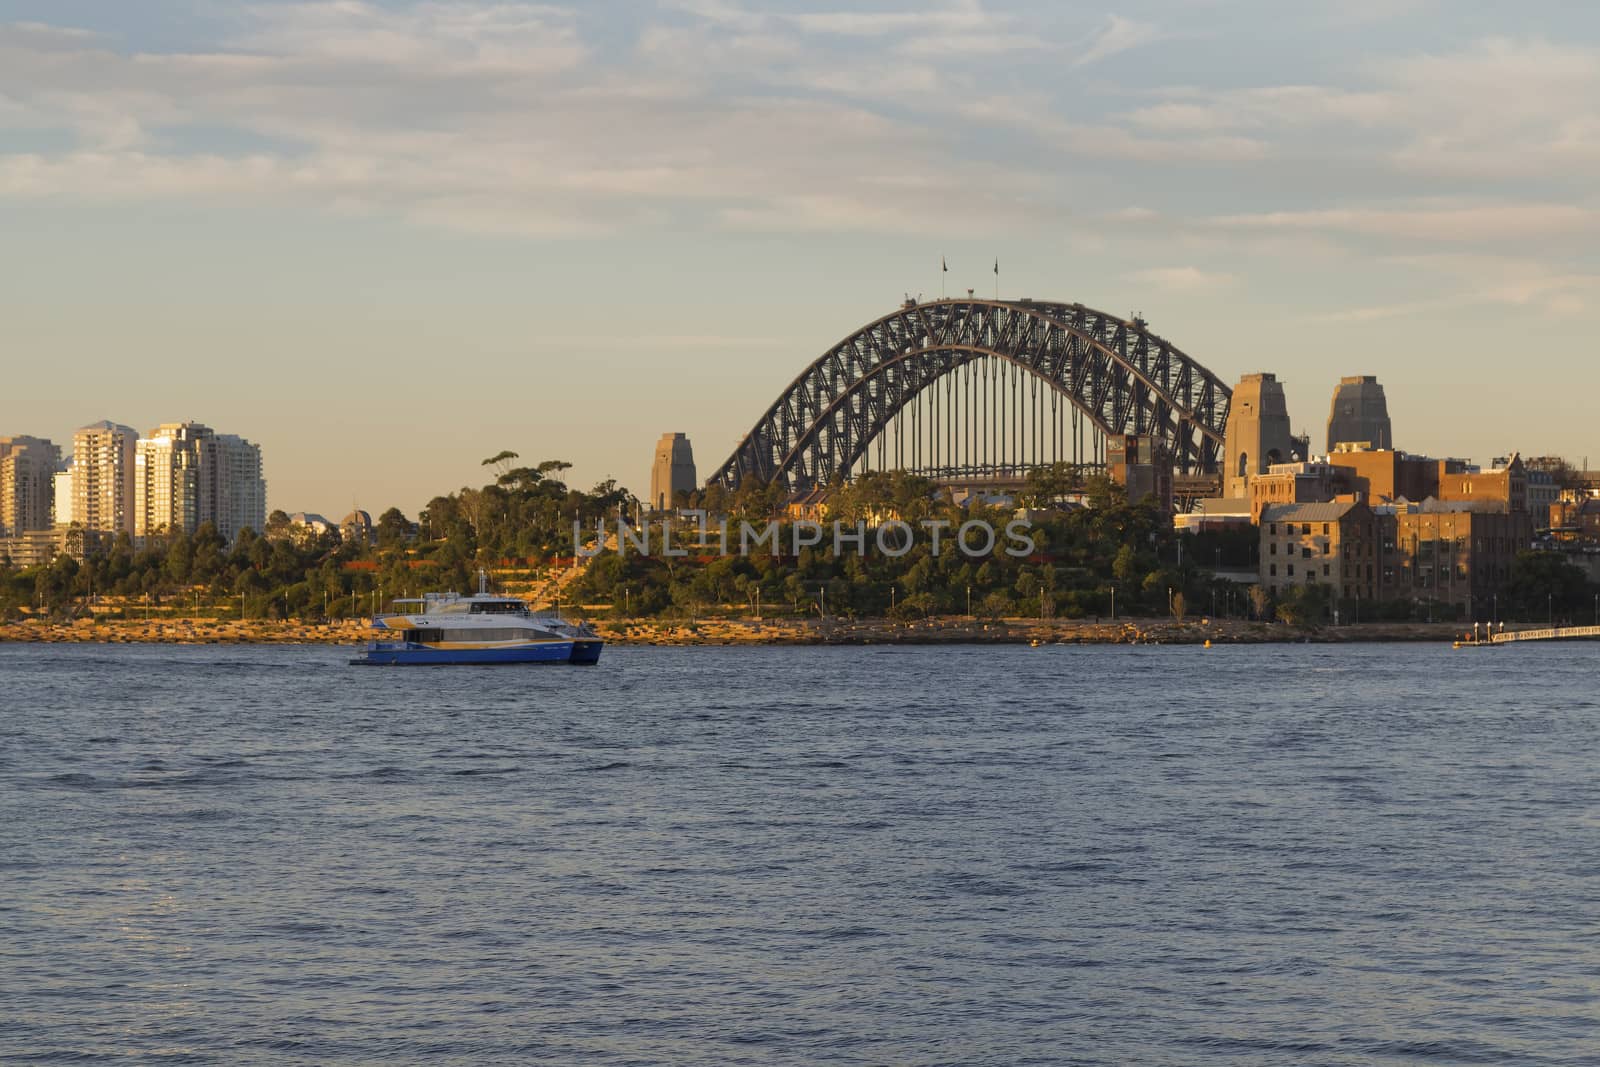 Sydney Harbour Bridge Australia at sunset seen from the suburb of Pyrmont